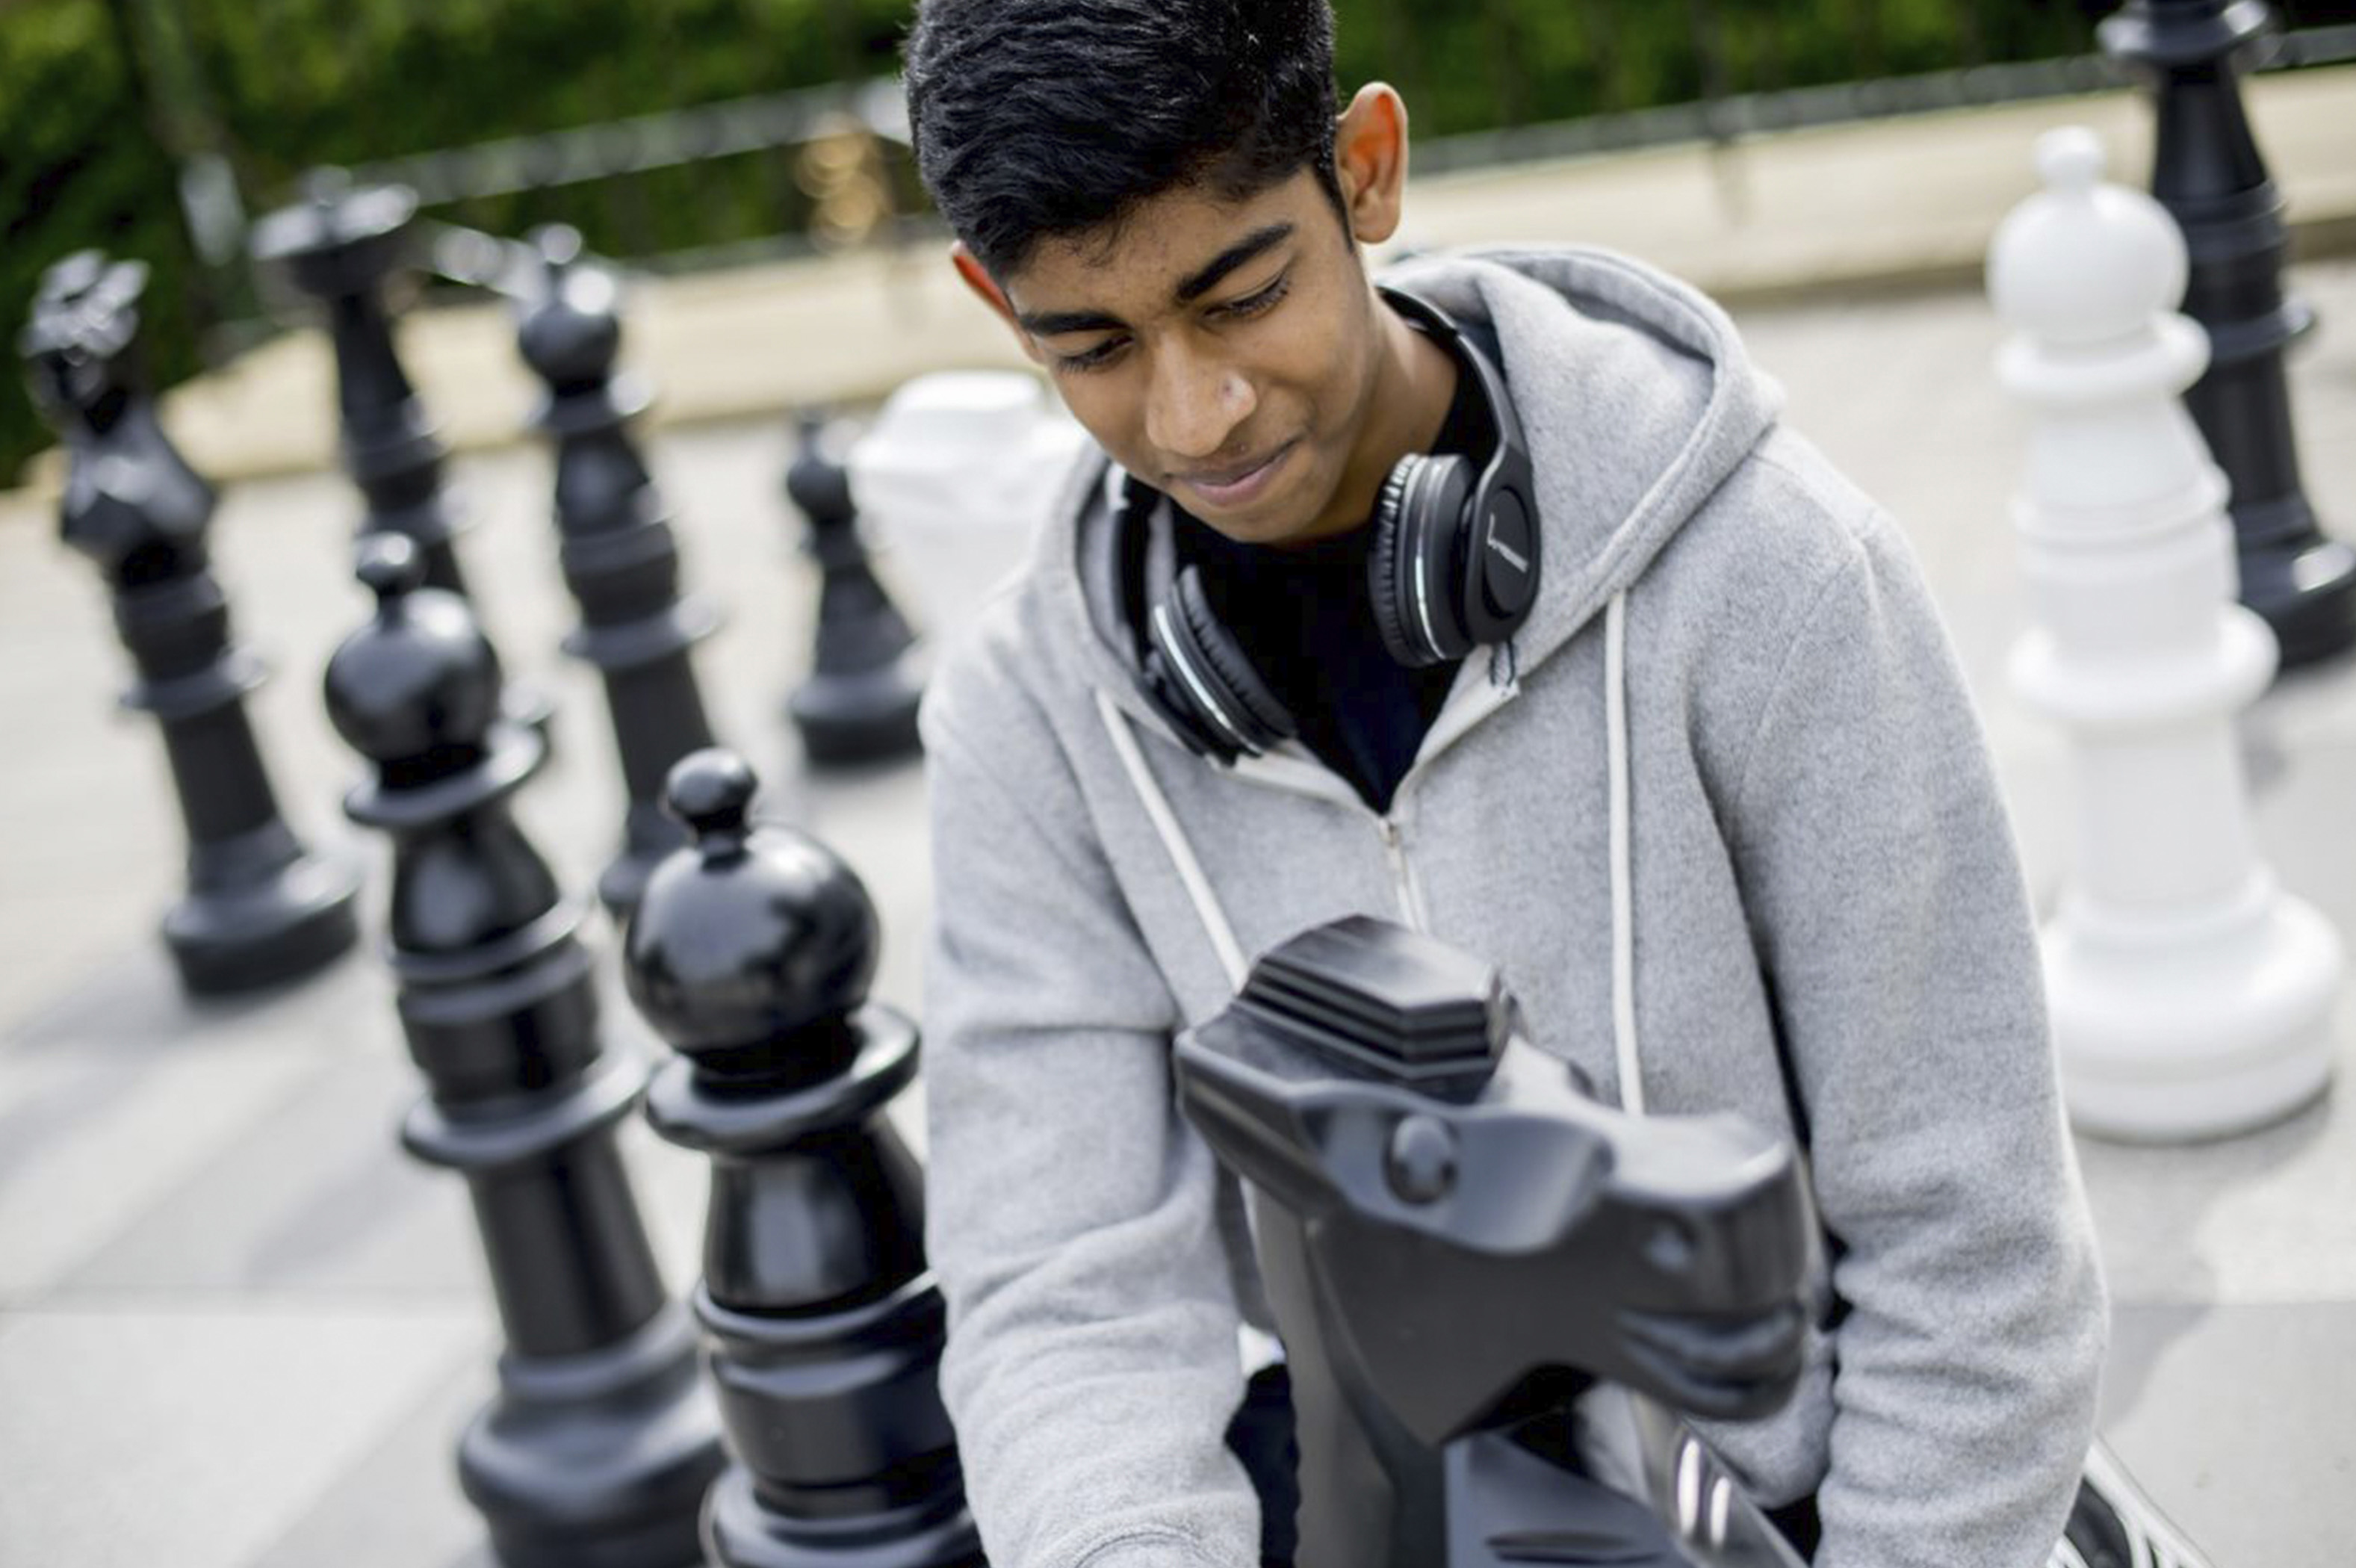 An undergraduate student playing giant chess outdoors on campus